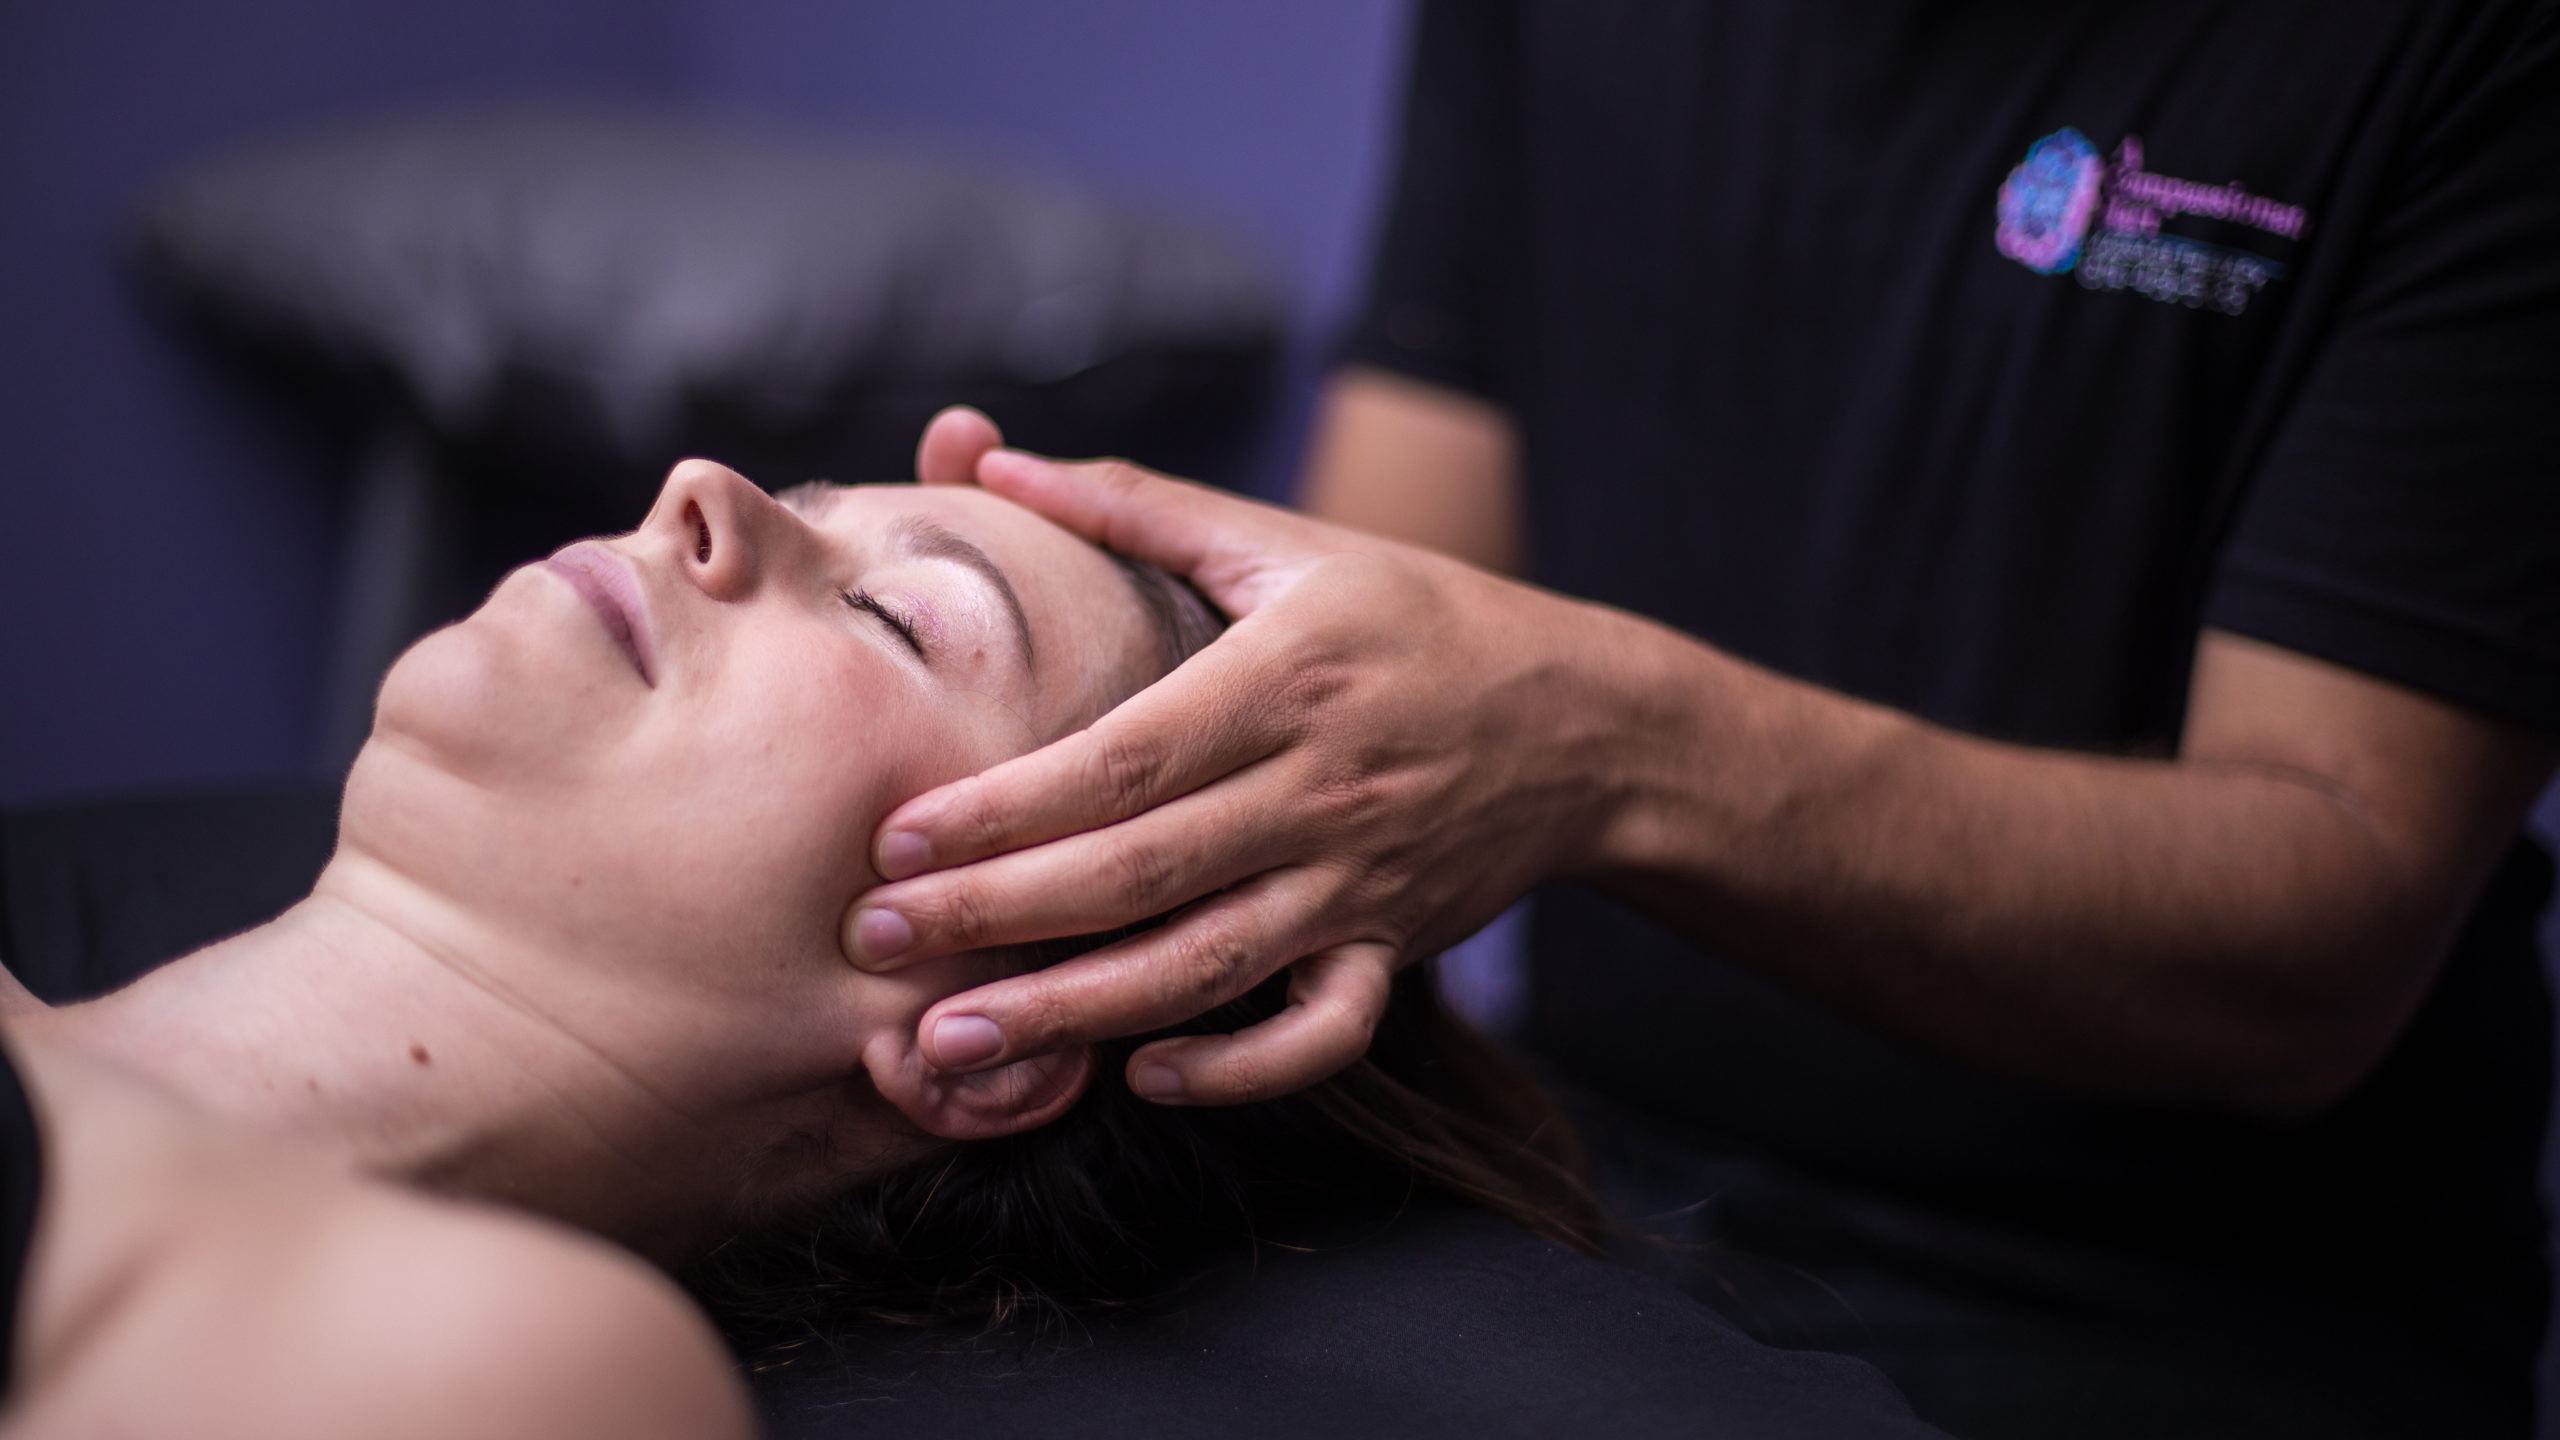 Close-up photo of massage therapist working on the temples and forehead of a client during branding photo session